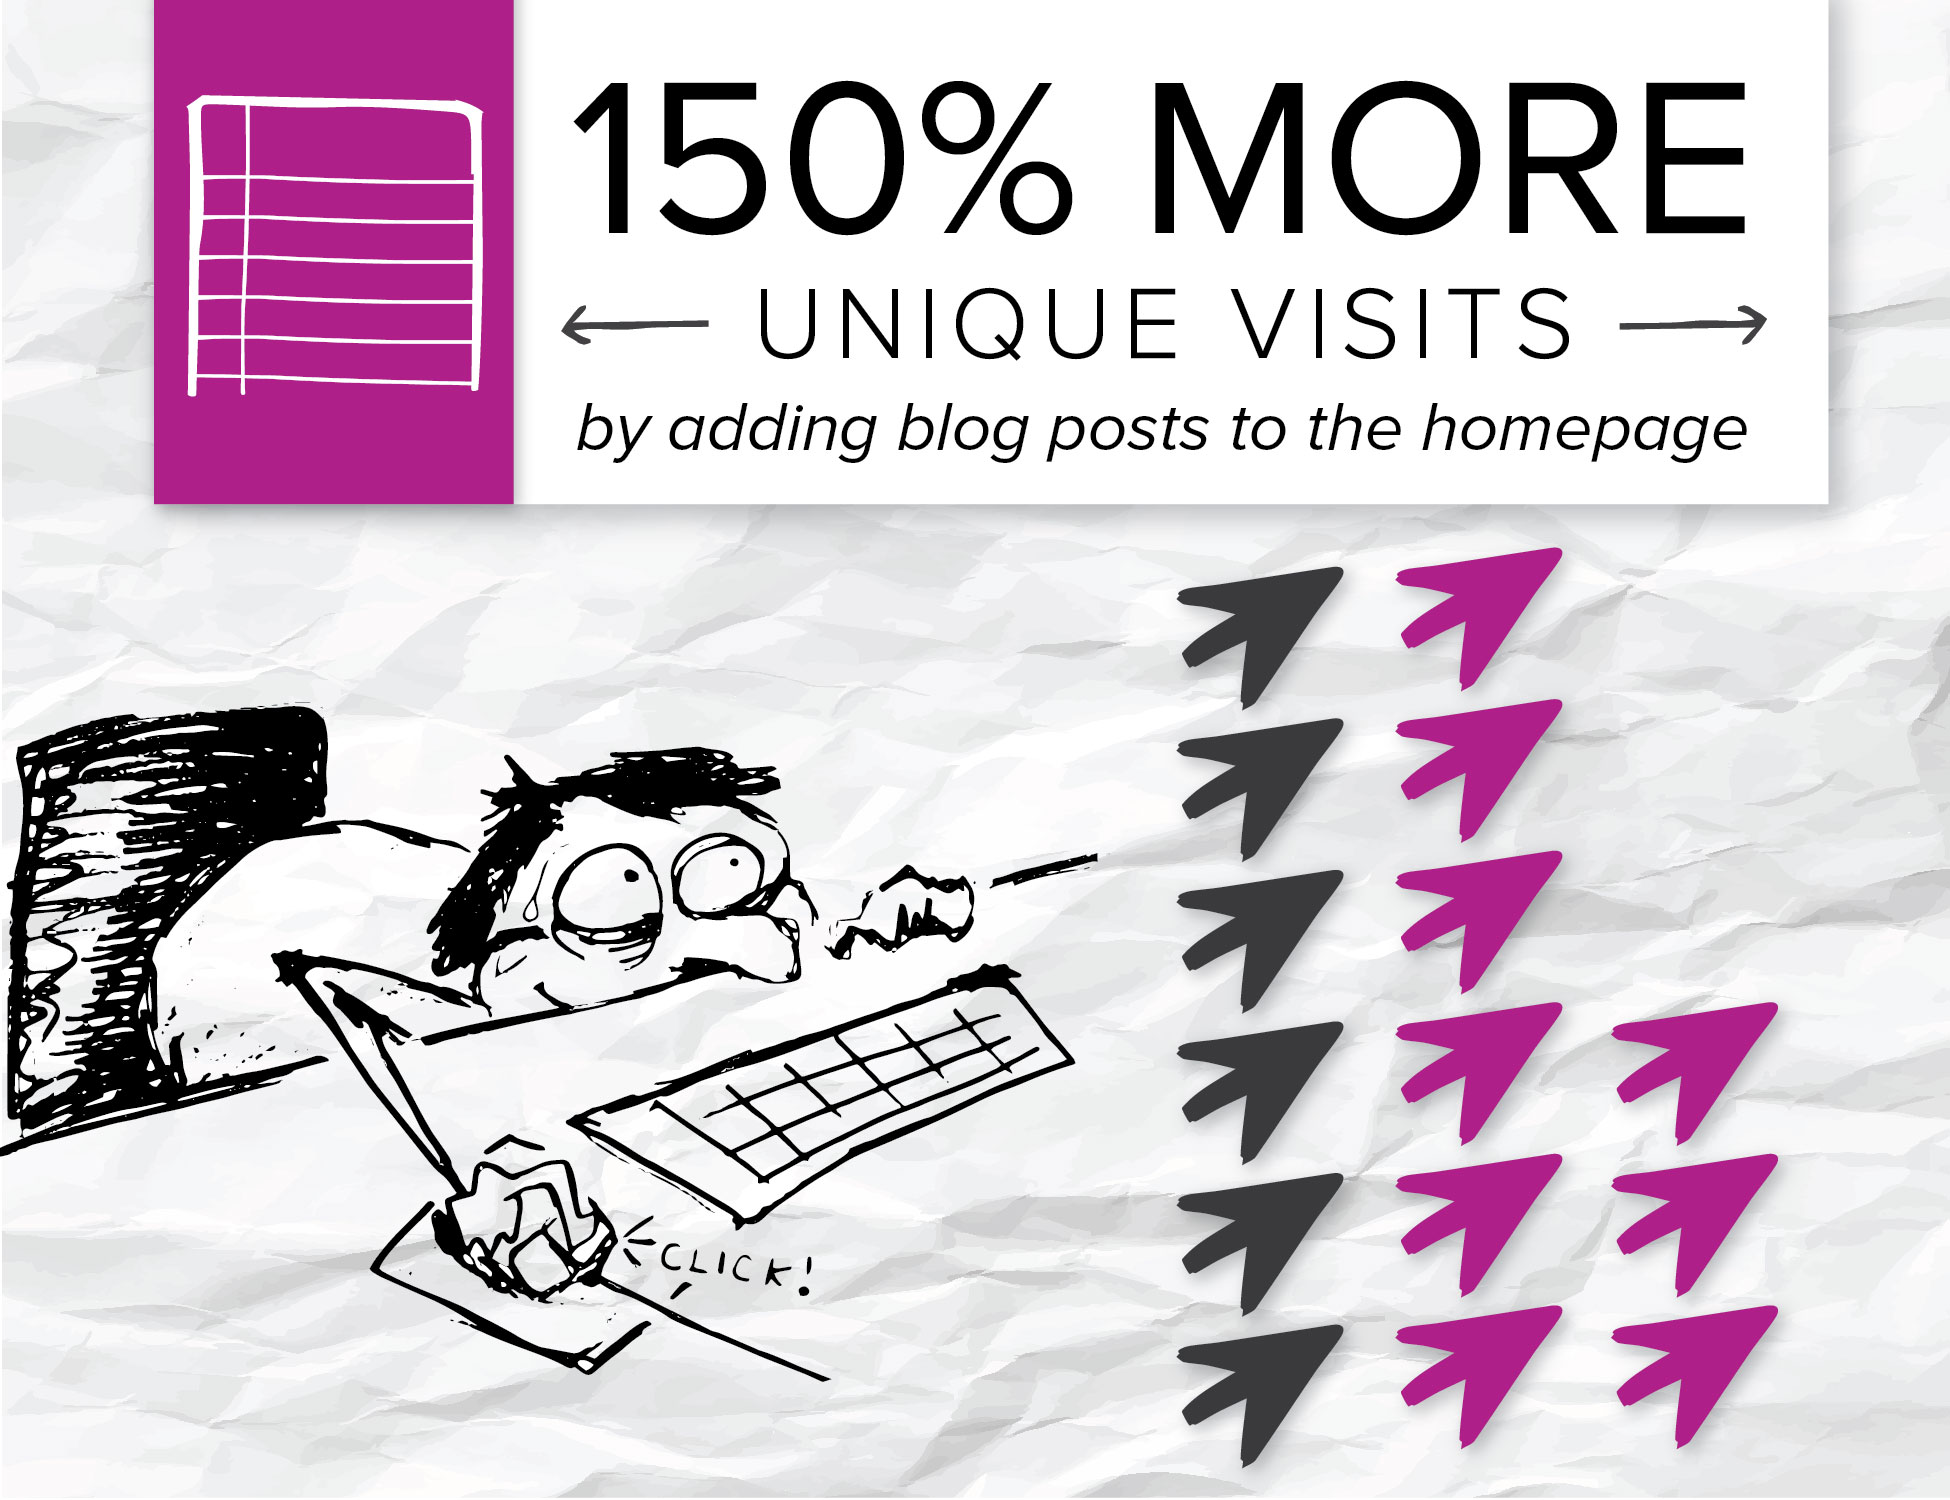 A company sees 150% more unique visits when it adds headlines to its homepage and adds images.